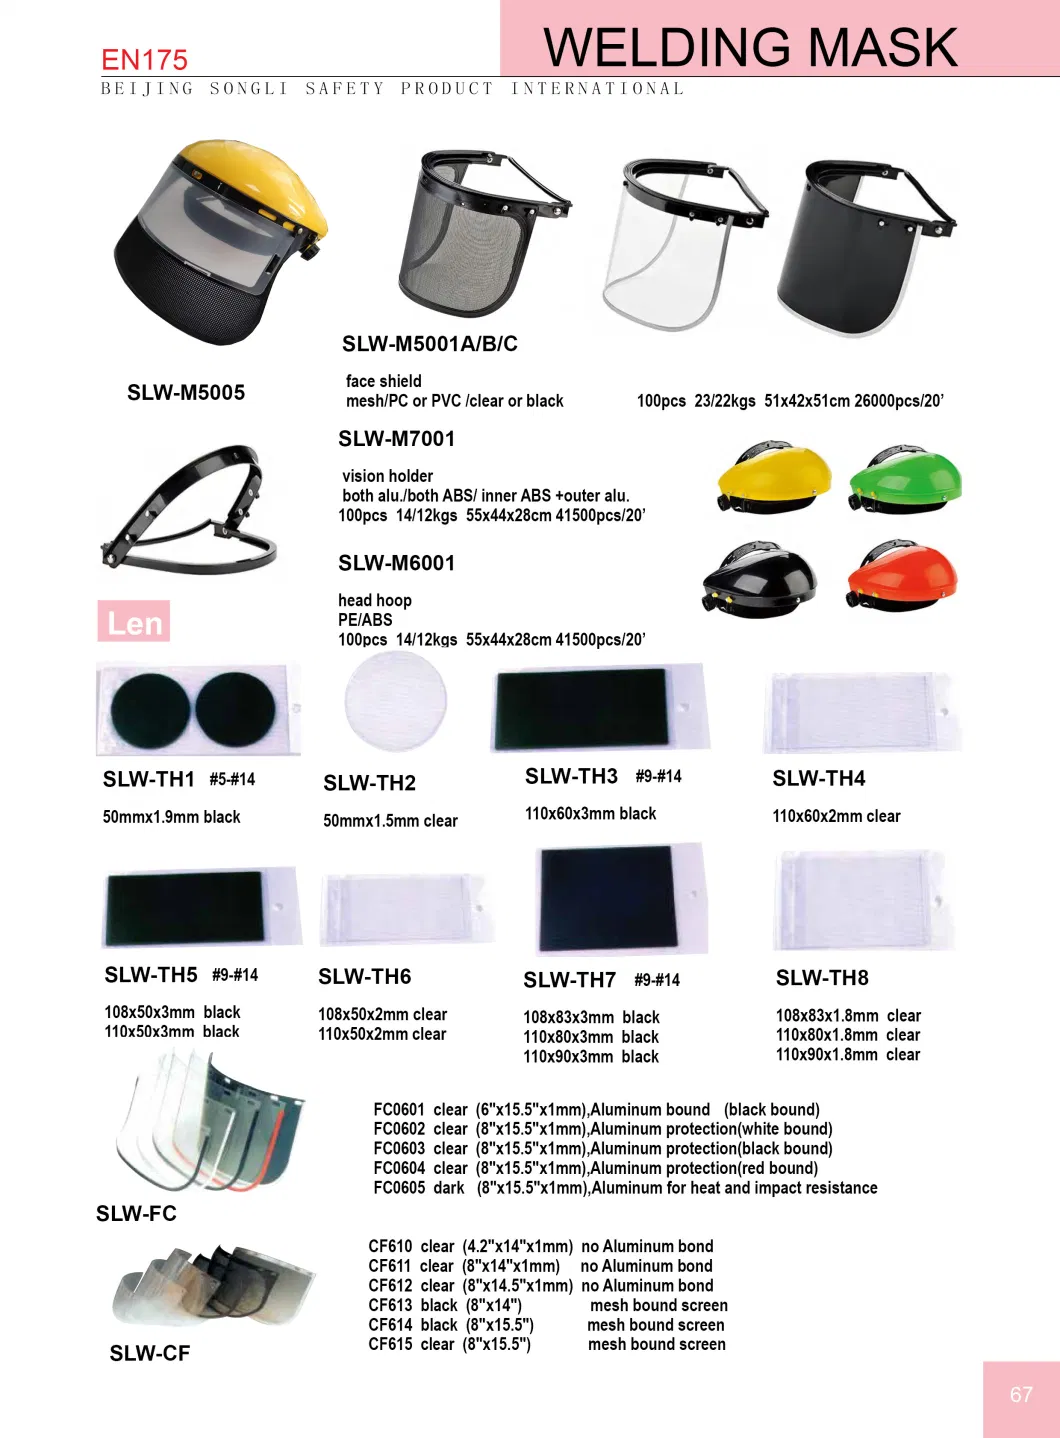 Slw-M5006 Workplace Safety Welding Mask